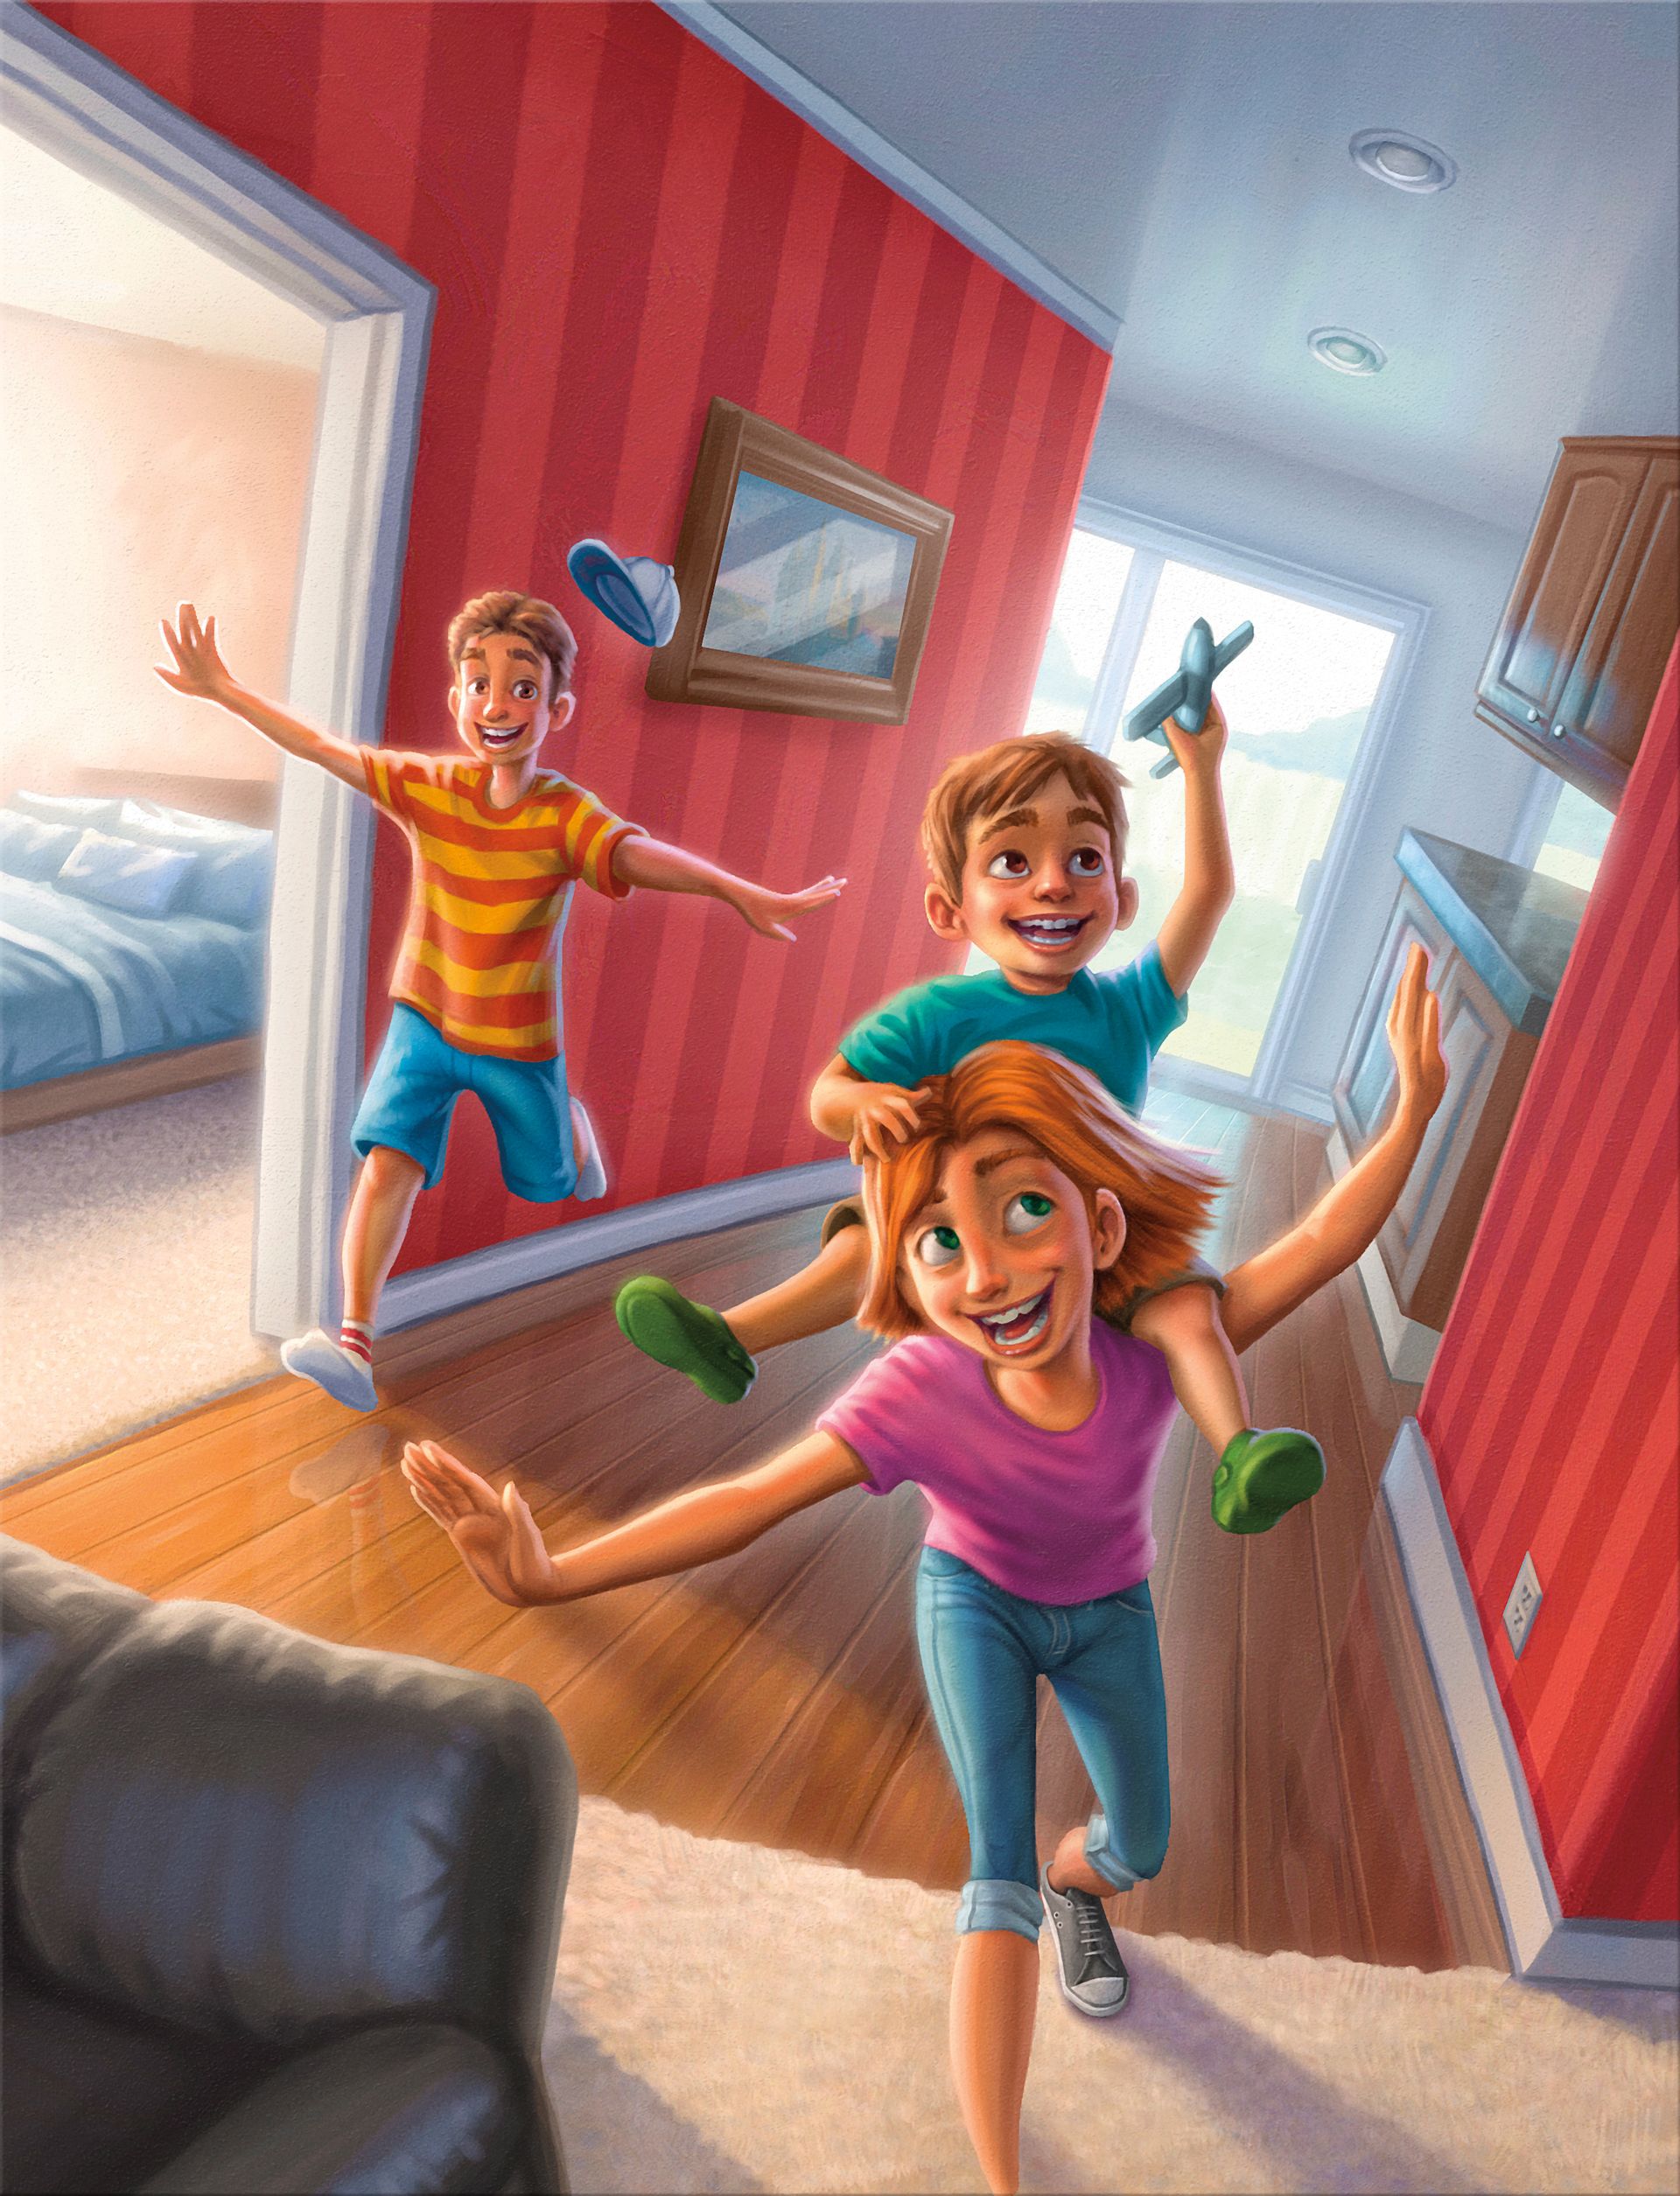 A brother and a sister play with their young brother, pretending to fly a plane in their house.